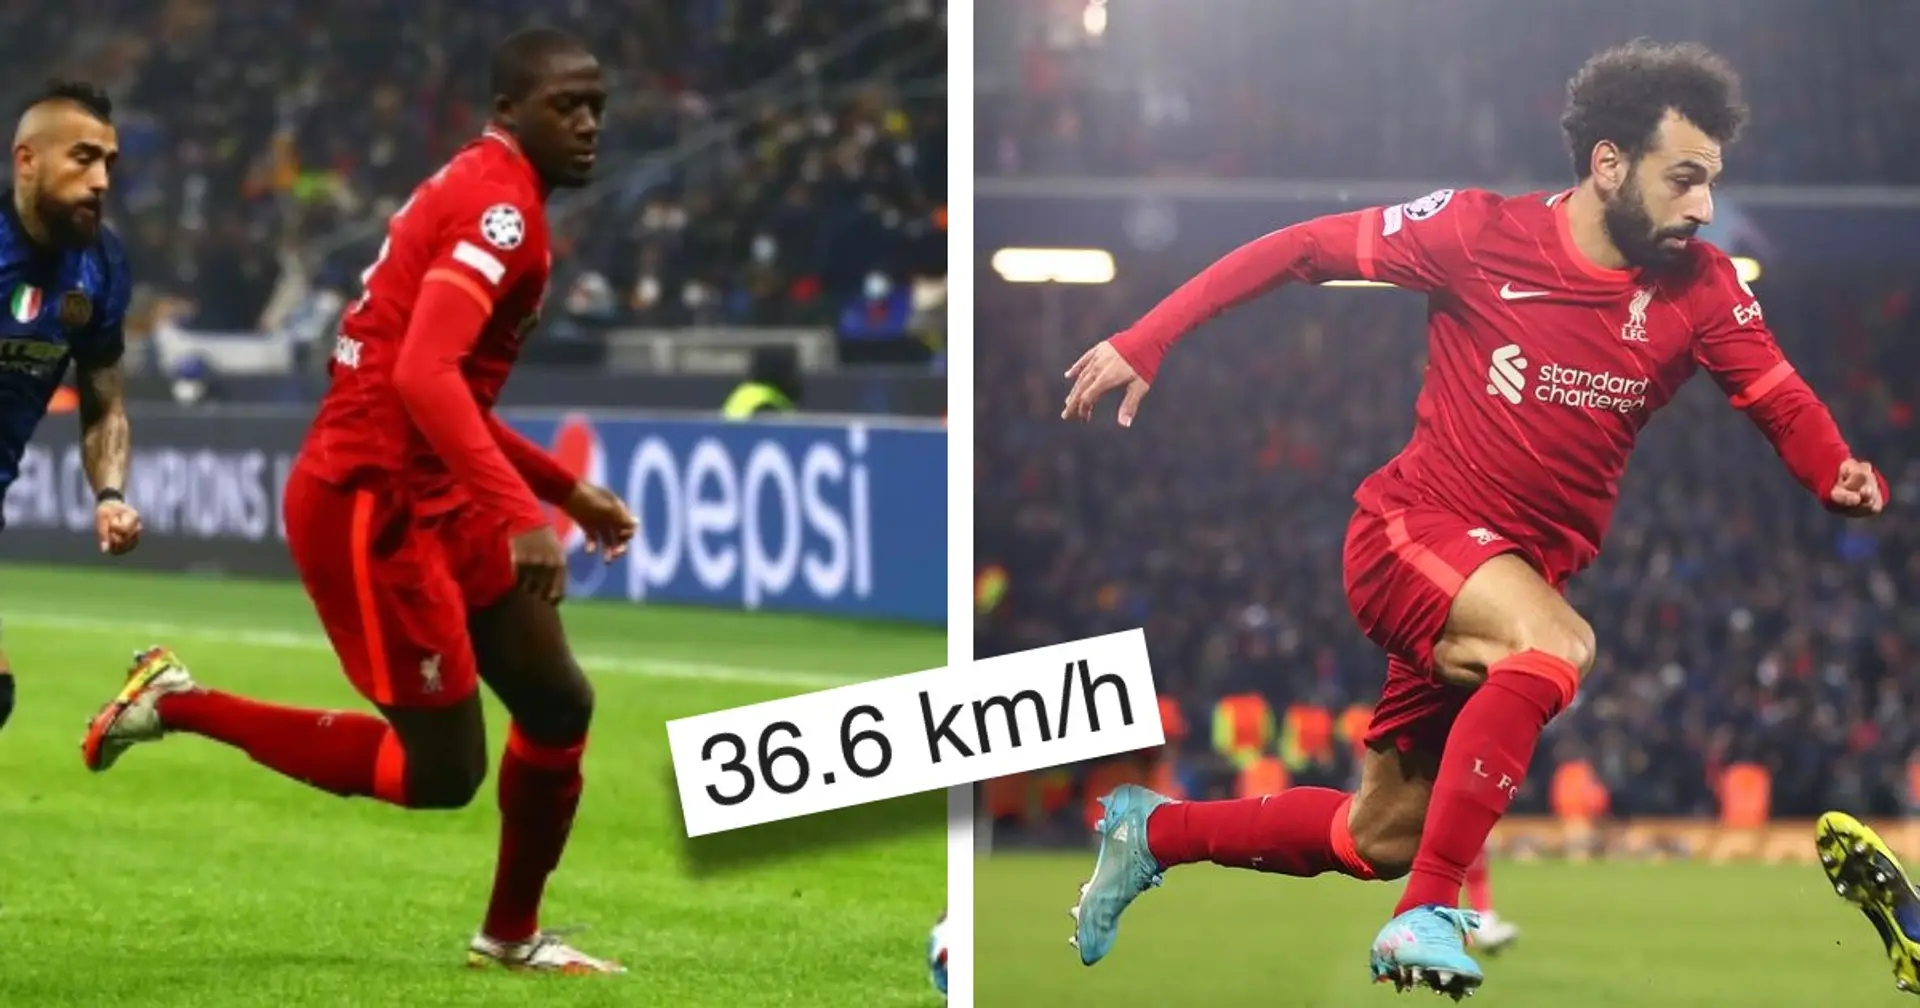 Salah and Konate among the fastest recorded sprints in Premier League this season